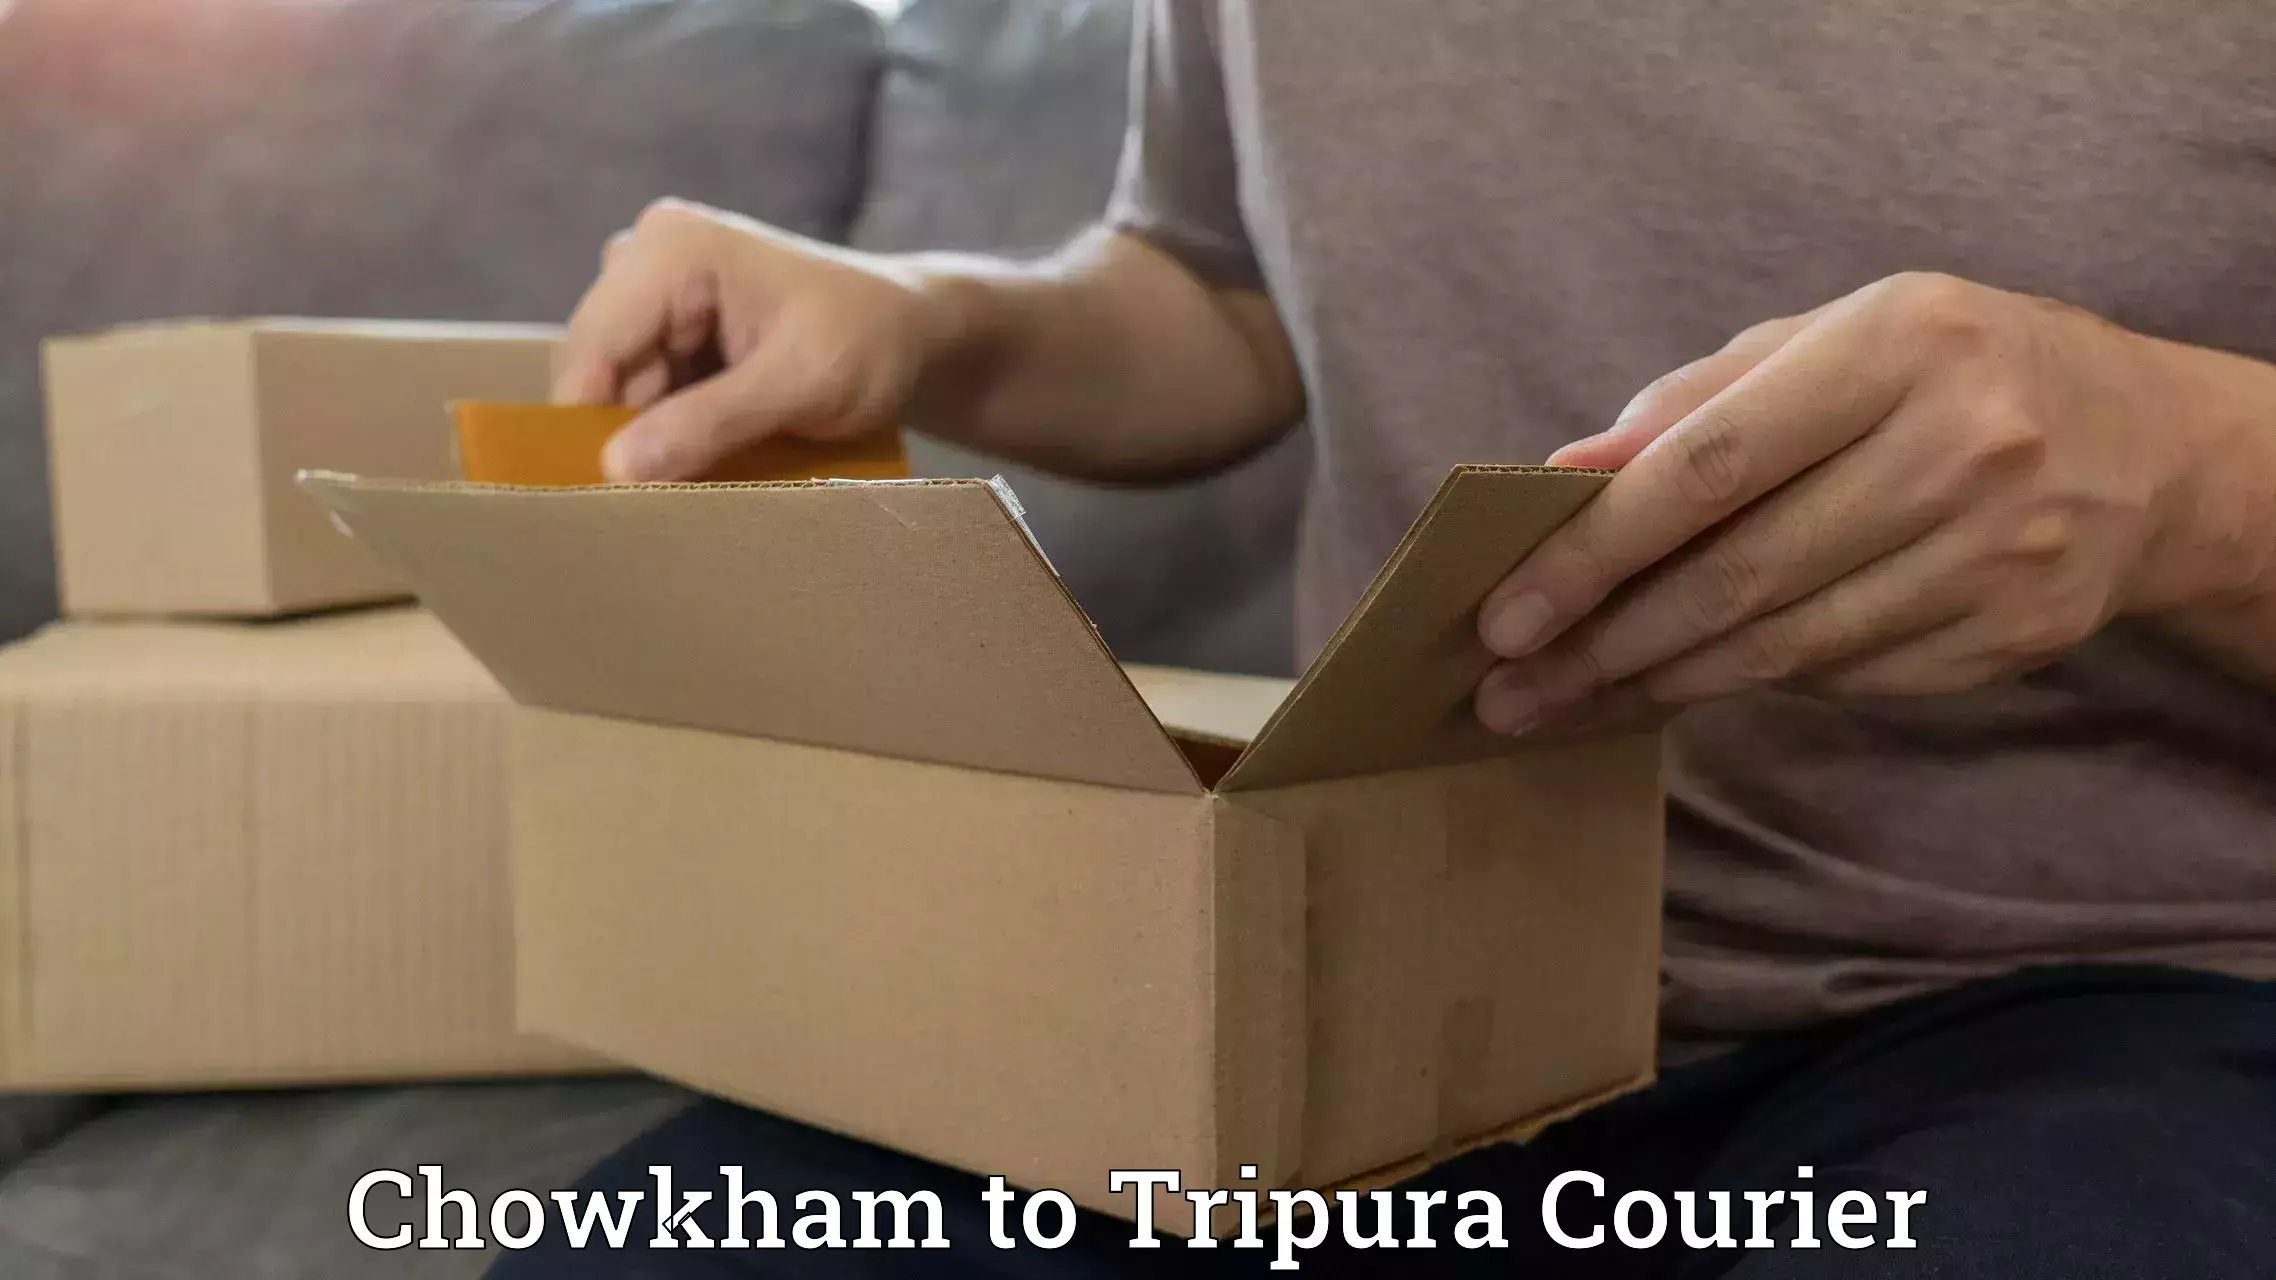 Air courier services Chowkham to Tripura